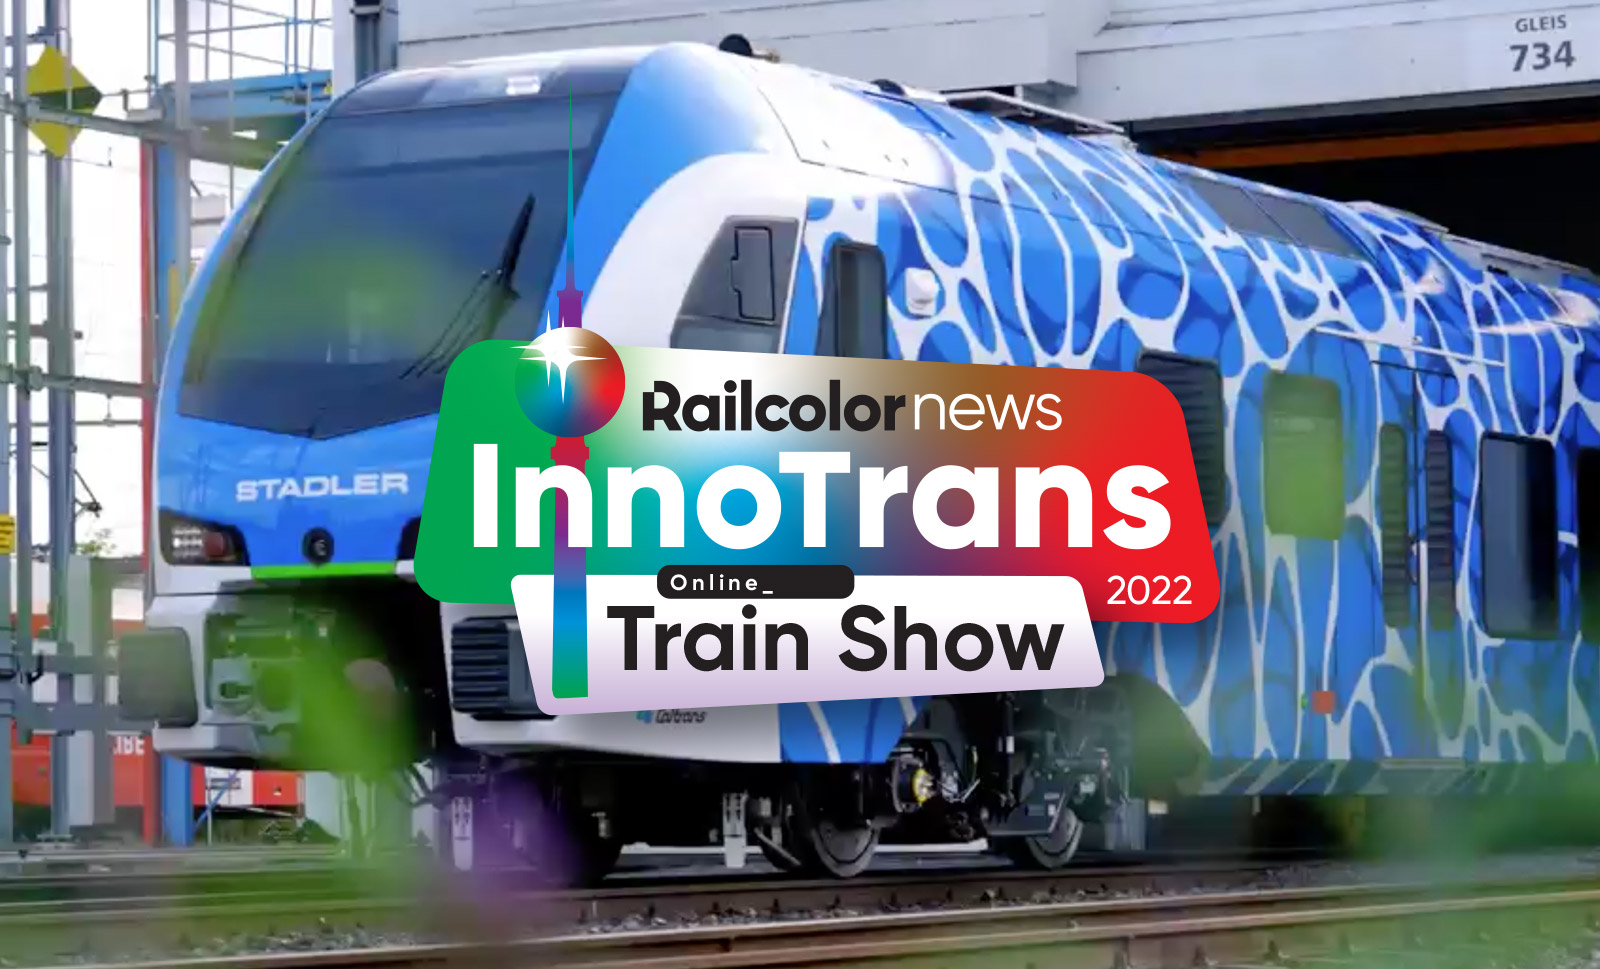 [EU] Innotrans 2022: Which trains will be on display in Berlin? [updated]